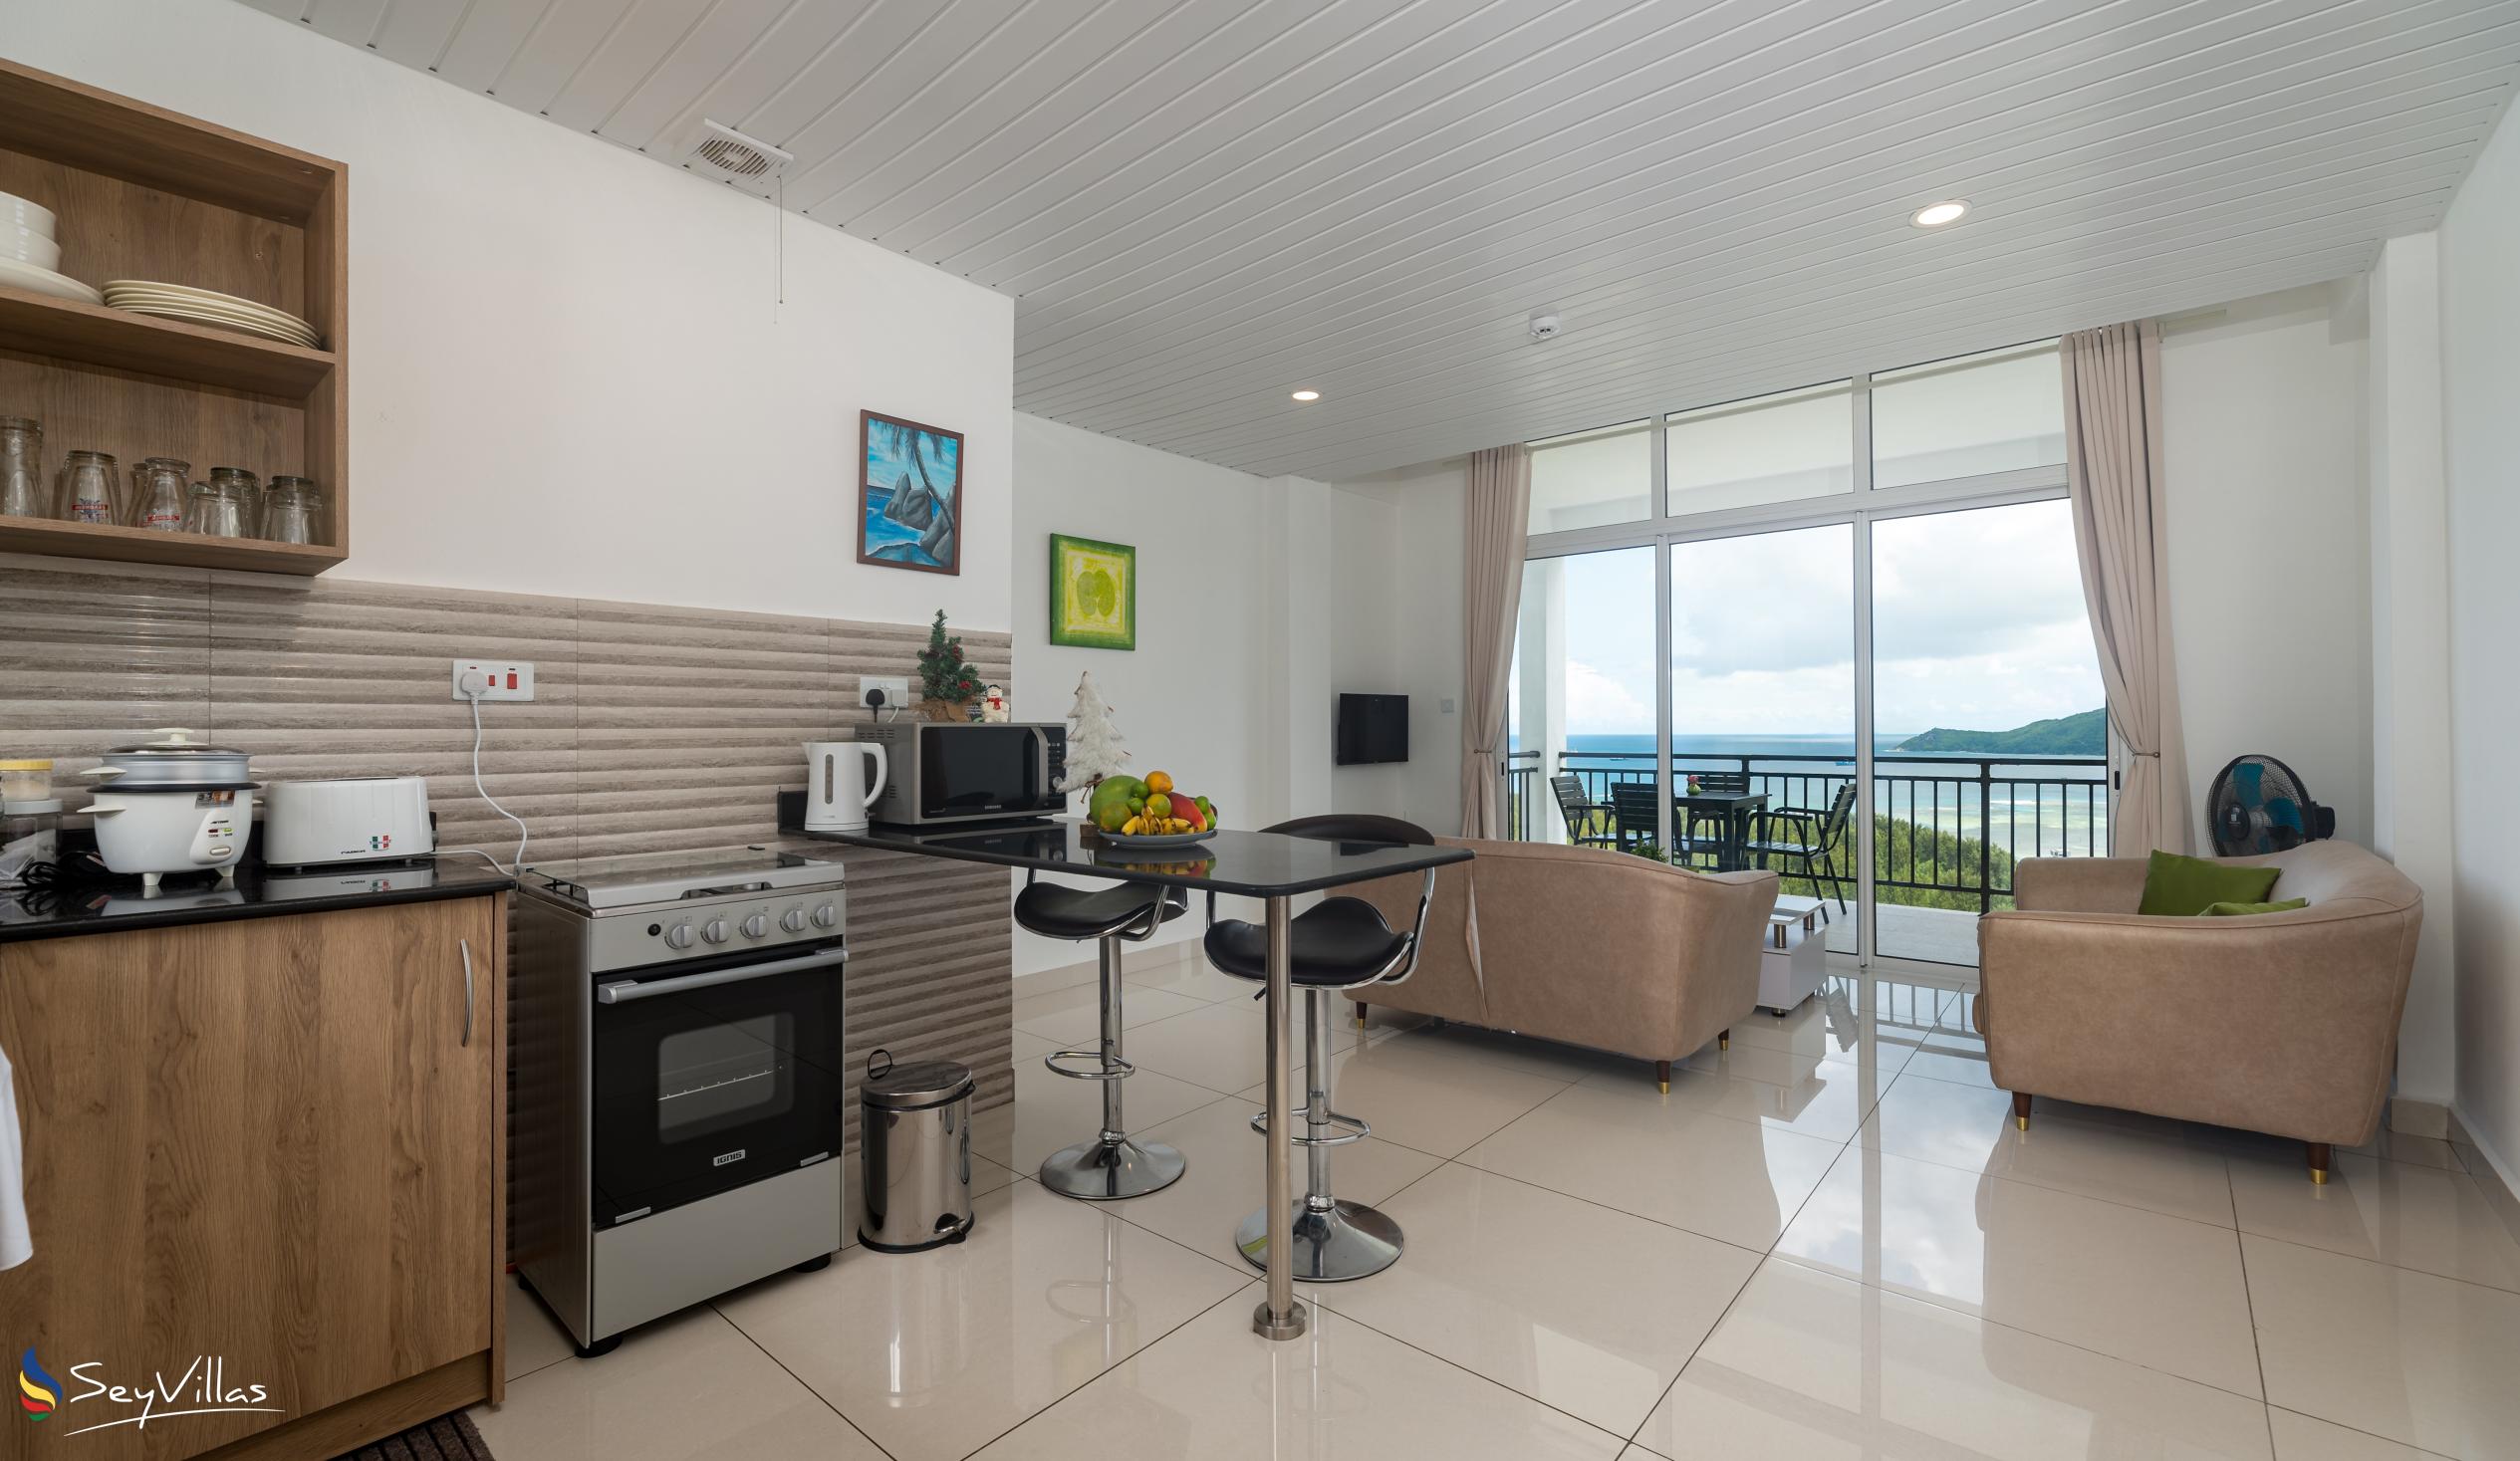 Photo 76: Creole Pearl Self Catering - 2-Bedroom Apartment - Mahé (Seychelles)